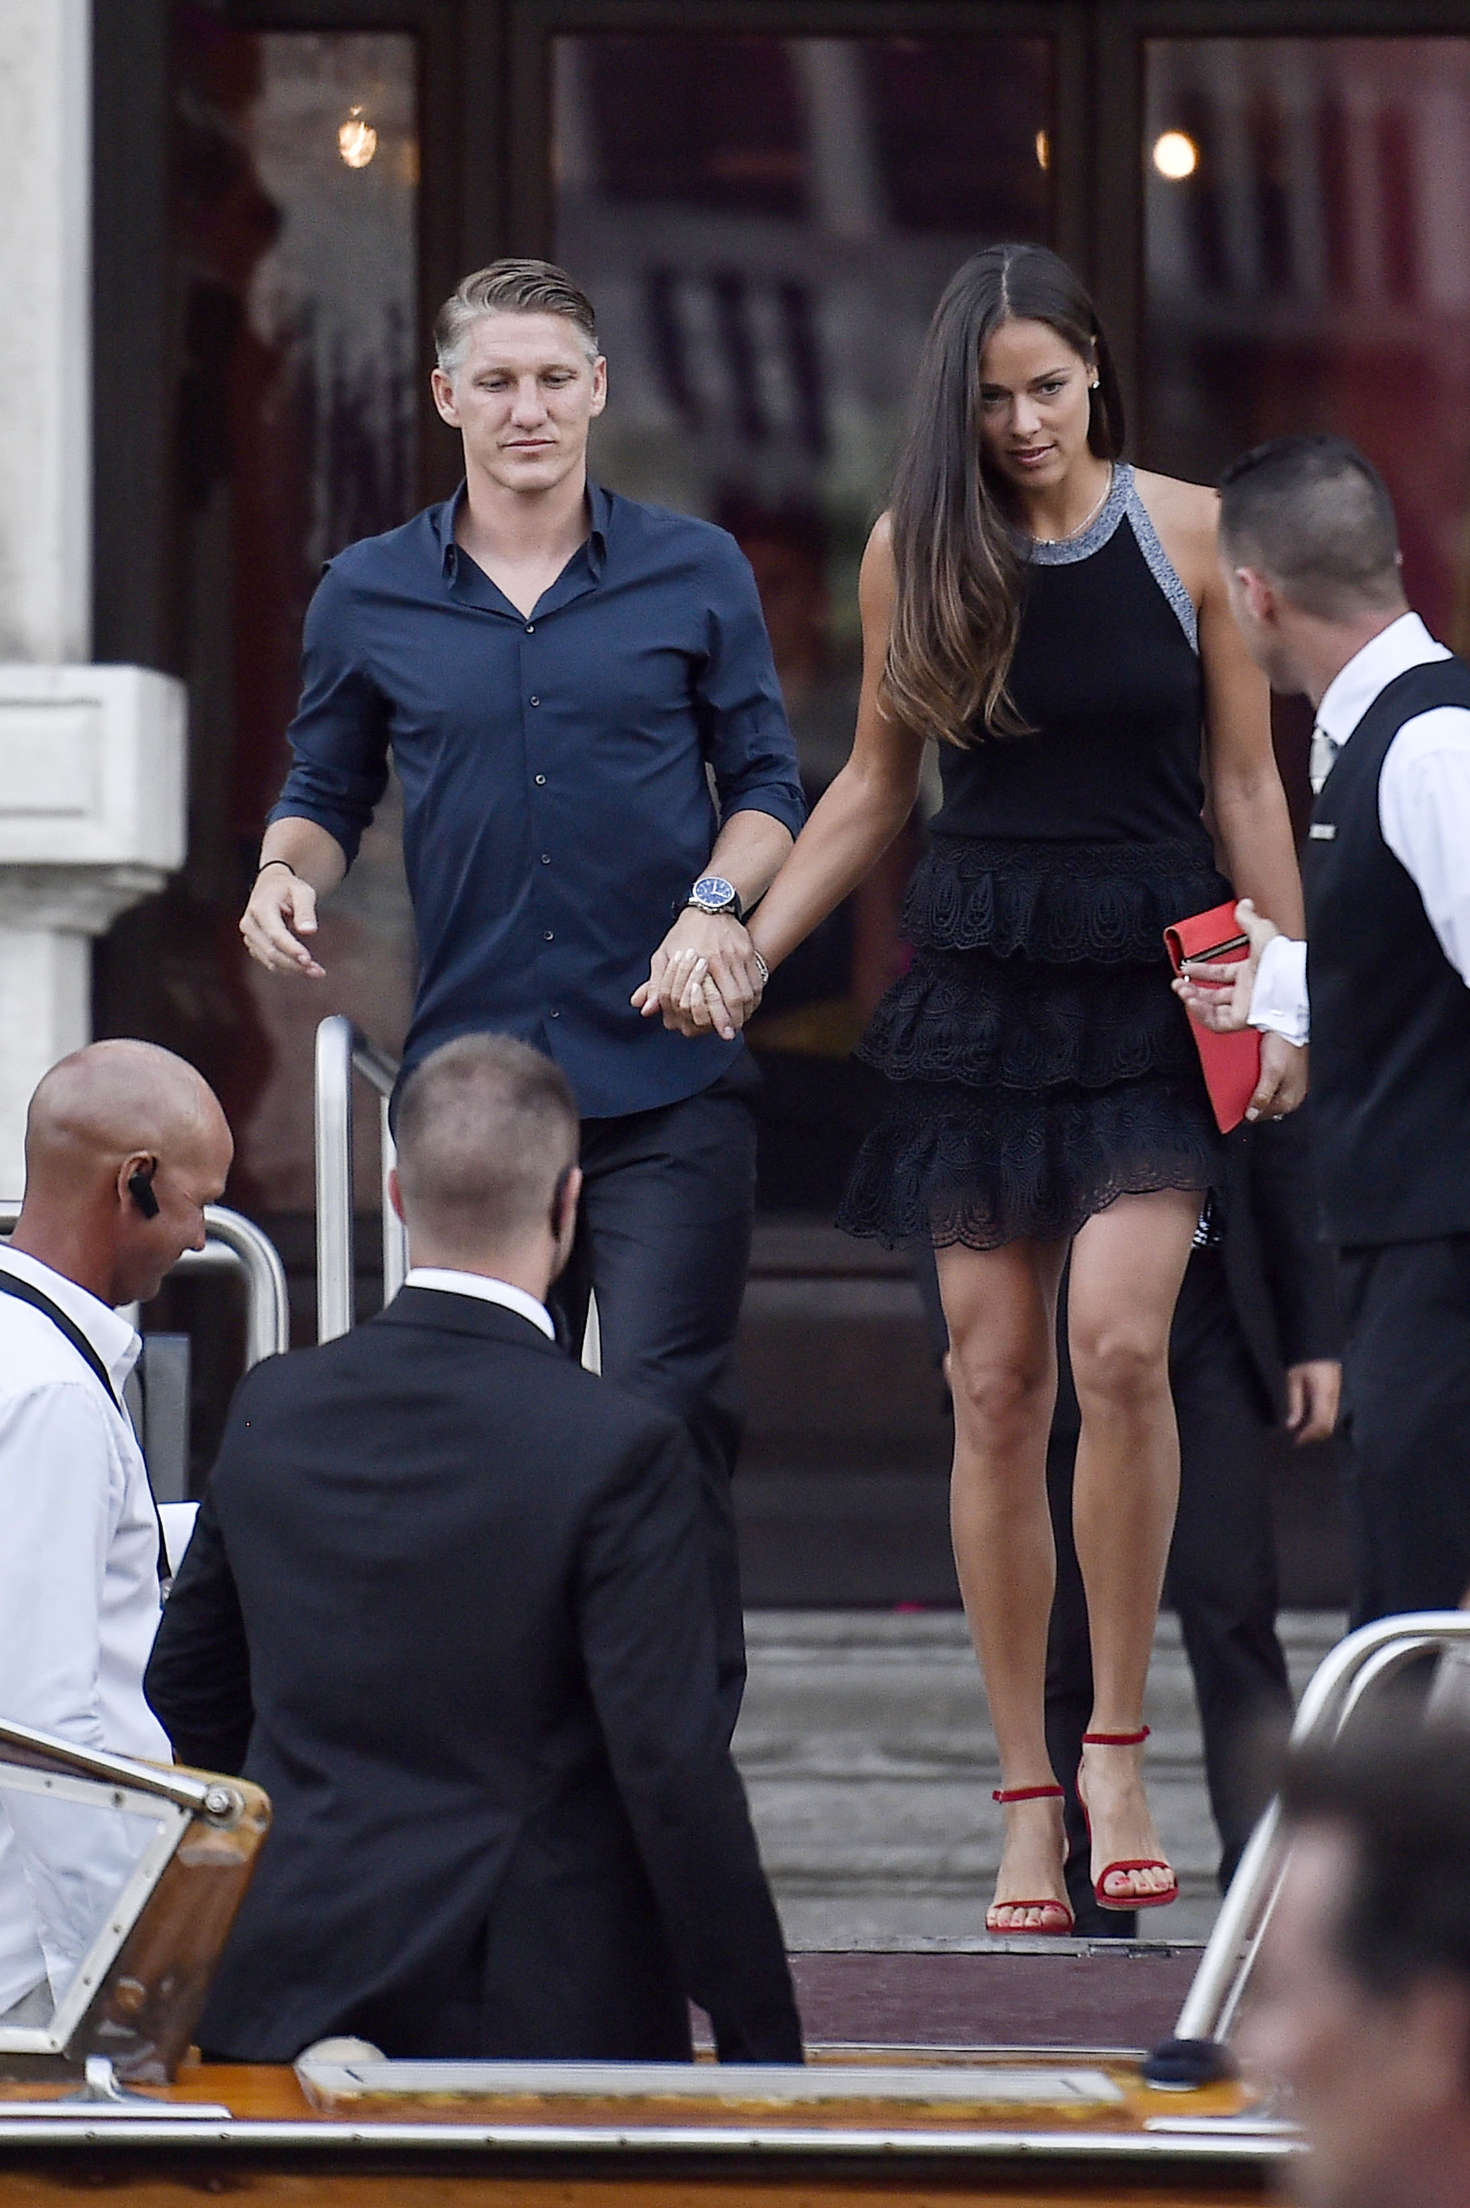 Ana Ivanovic and Bastian Schweinsteiger Out for Dinner in Venice